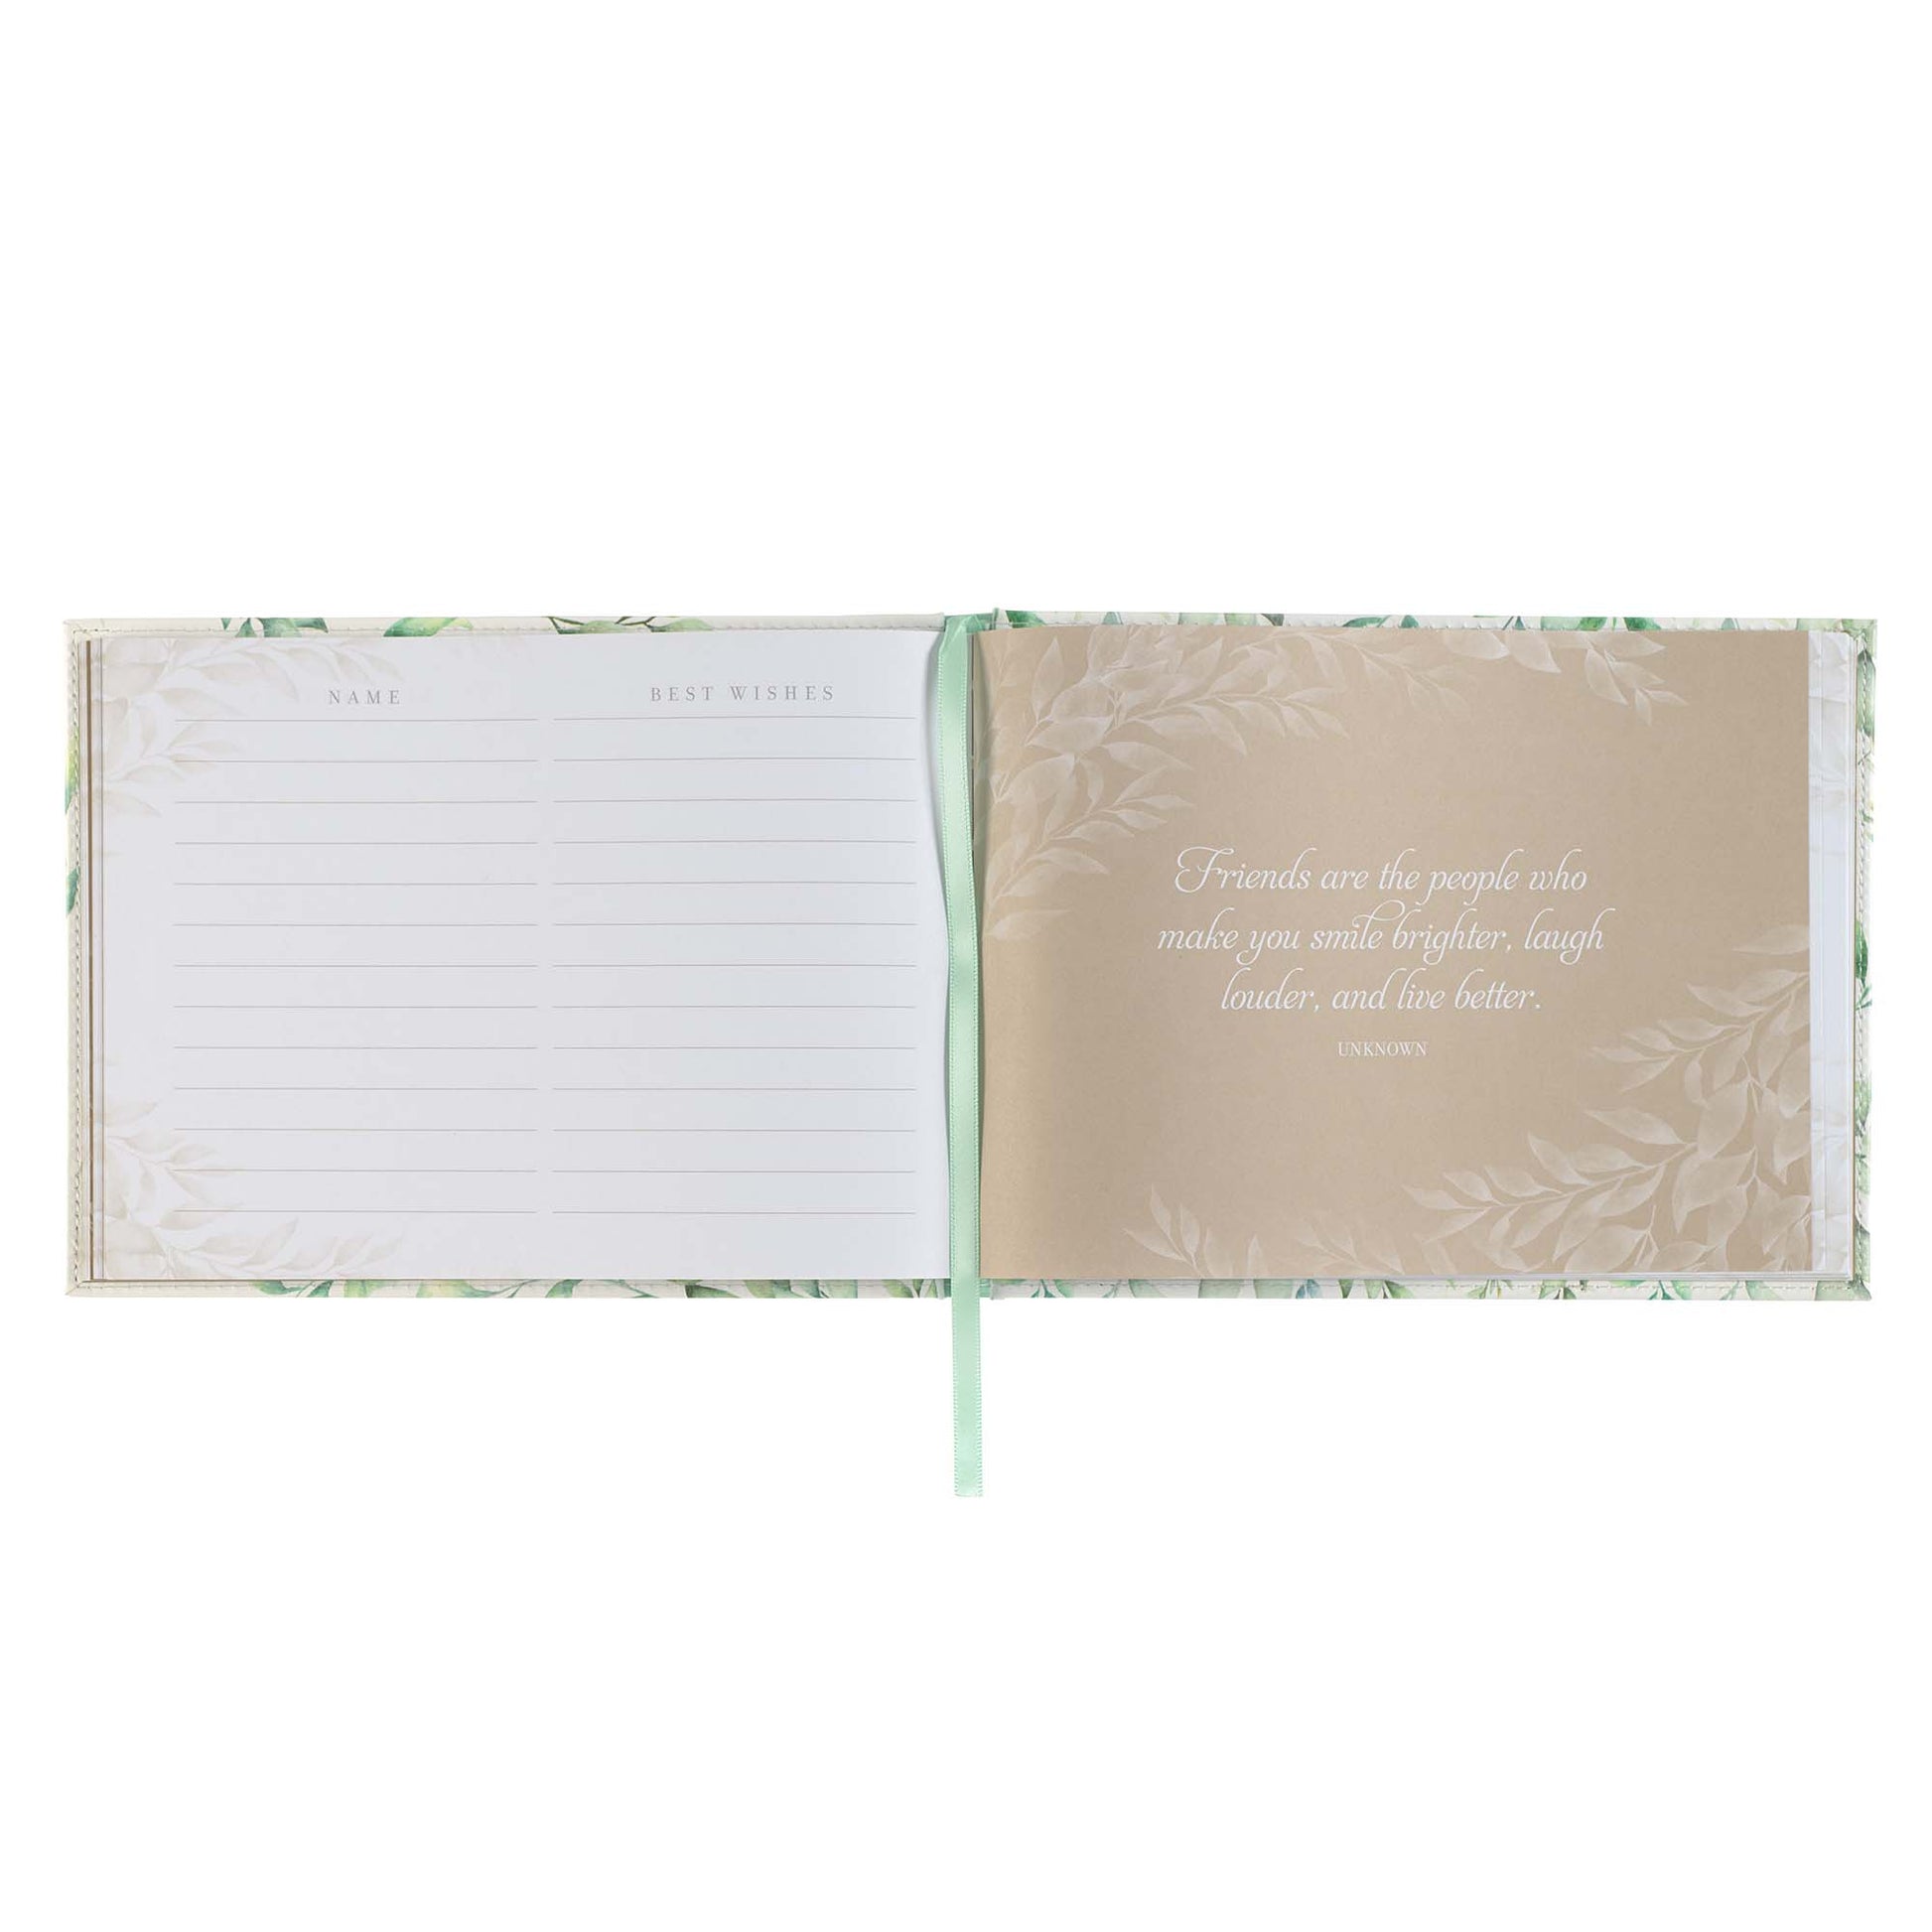 Green Leaves Medium White and Green Faux Leather Guest Book - The Christian Gift Company